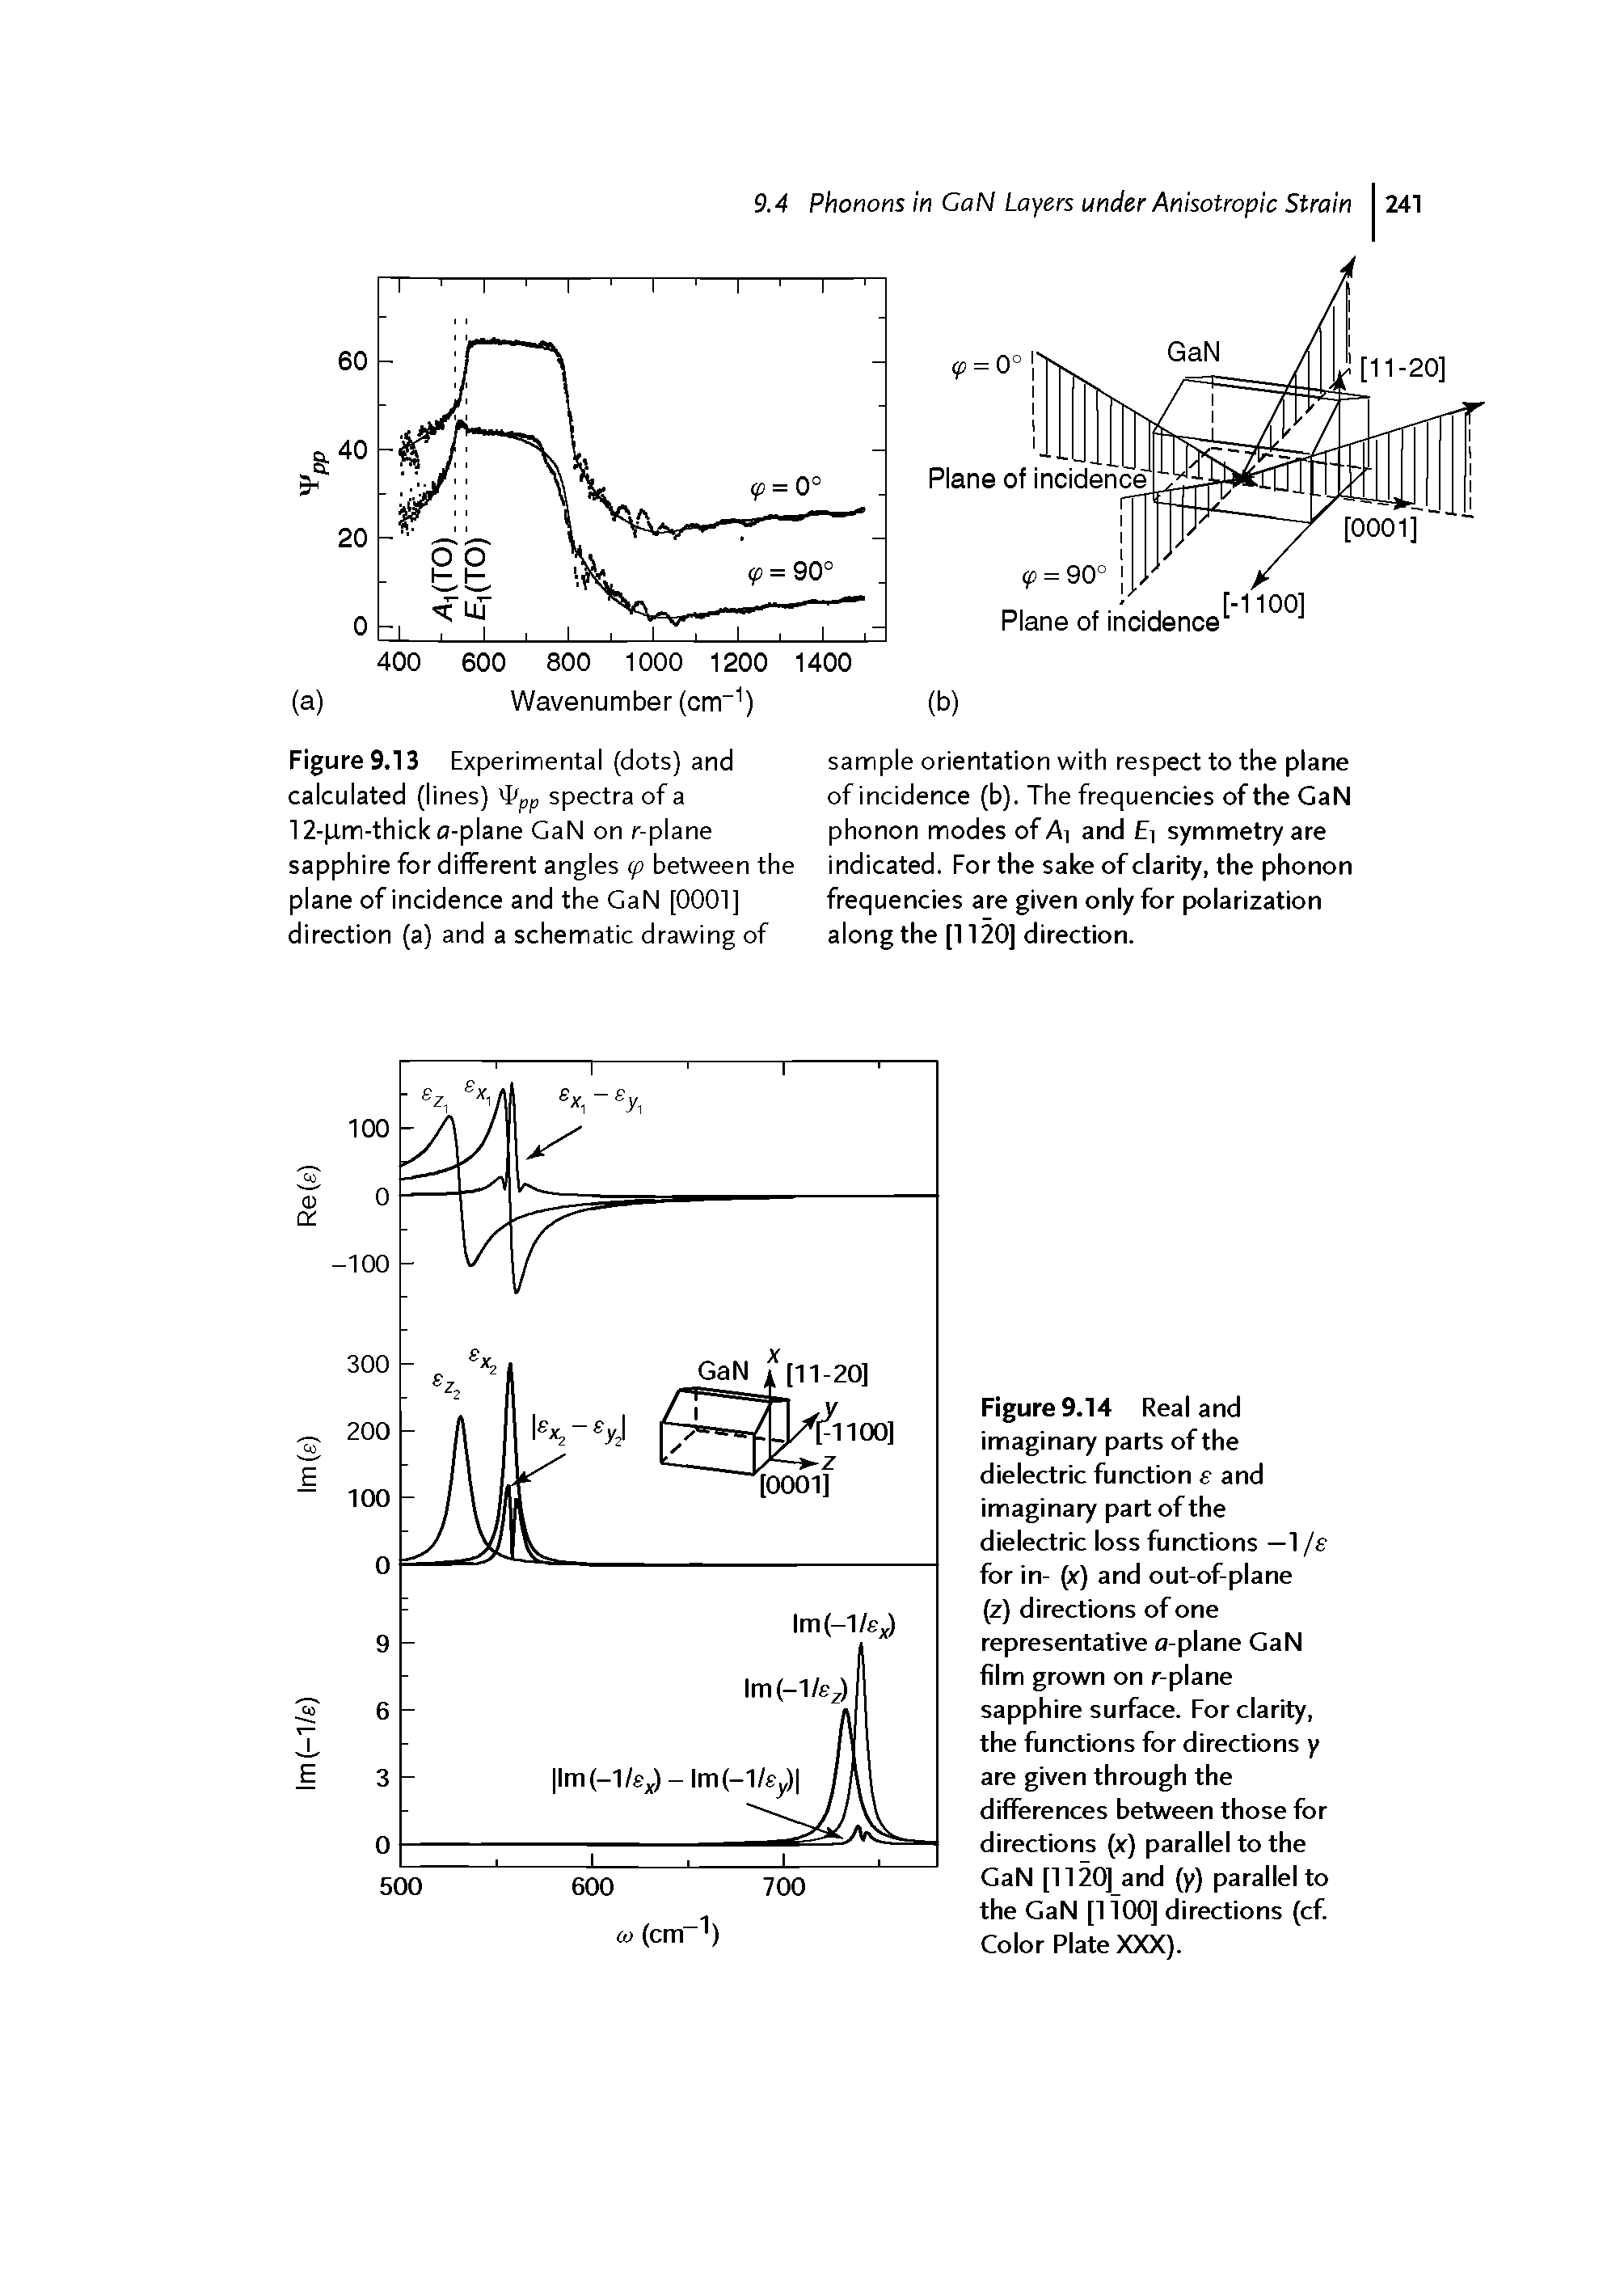 Figure 9.14 Real and imaginary parts of the dielectric function s and imaginary part of the dielectric loss functions —1 /e for in- (x) and out-of-plane (z) directions of one representative o-plane GaN film grown on r-plane sapphire surface. For clarity, the functions for directions y are given through the differences between those for directions (x) parallel to the GaN [1120] and (y) parallel to the GaN [1100] directions (cf. Color Plate XXX).